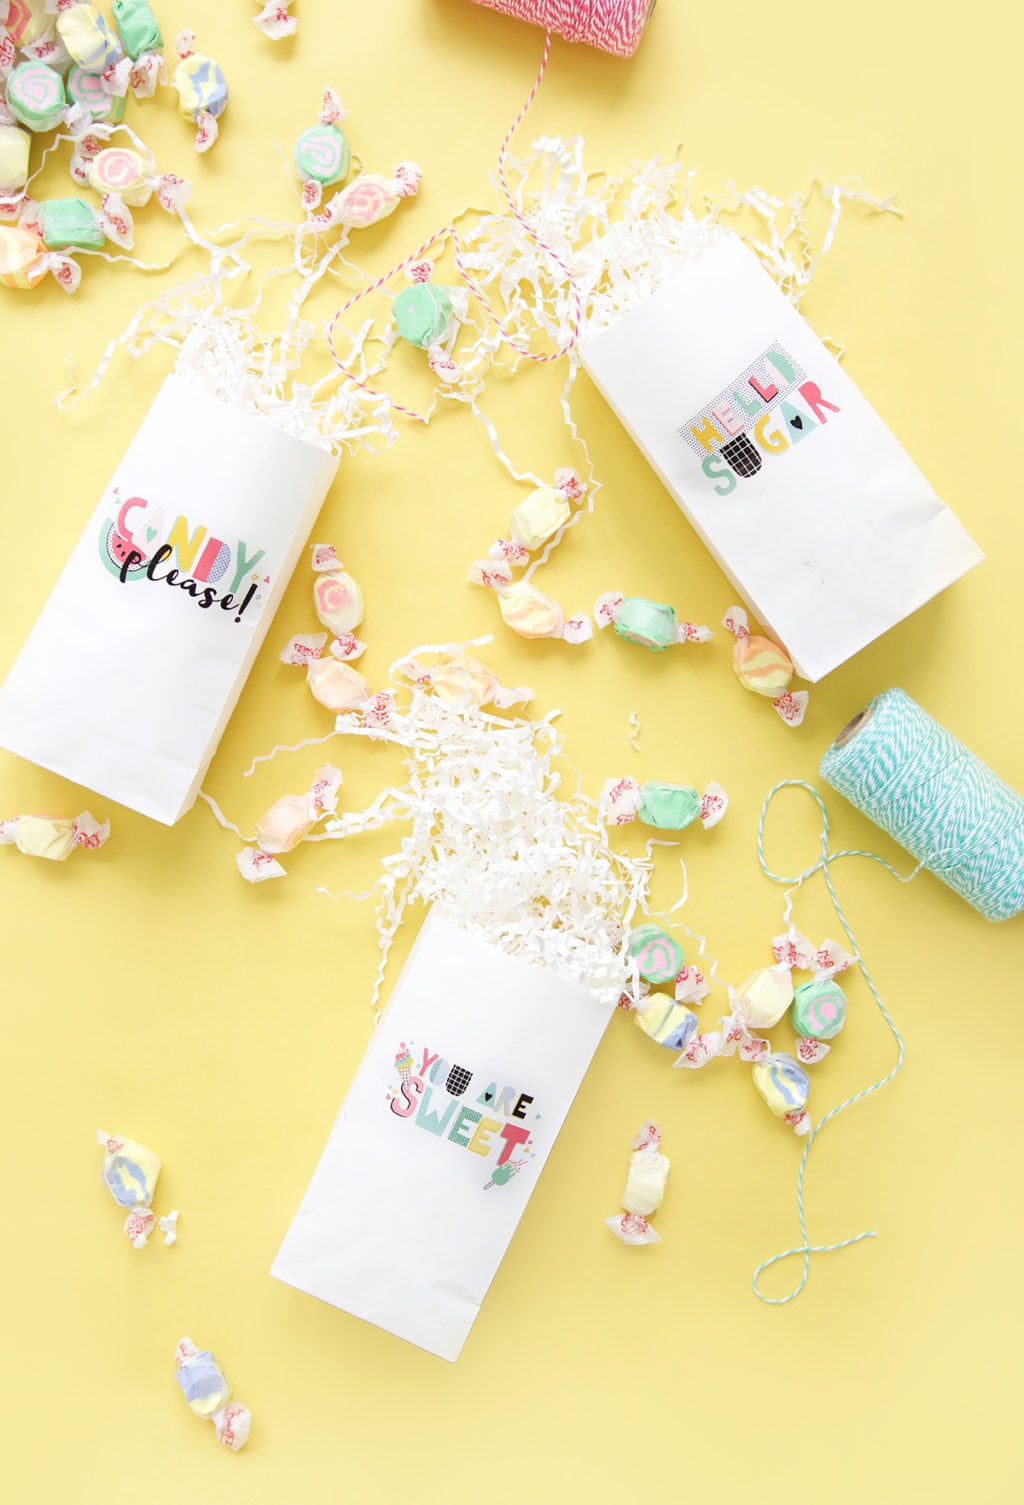 Printers are great for boring work but they are more fun when you use them to print your own treat bags for any occasion. Follow this simple video tutorial and learn how!